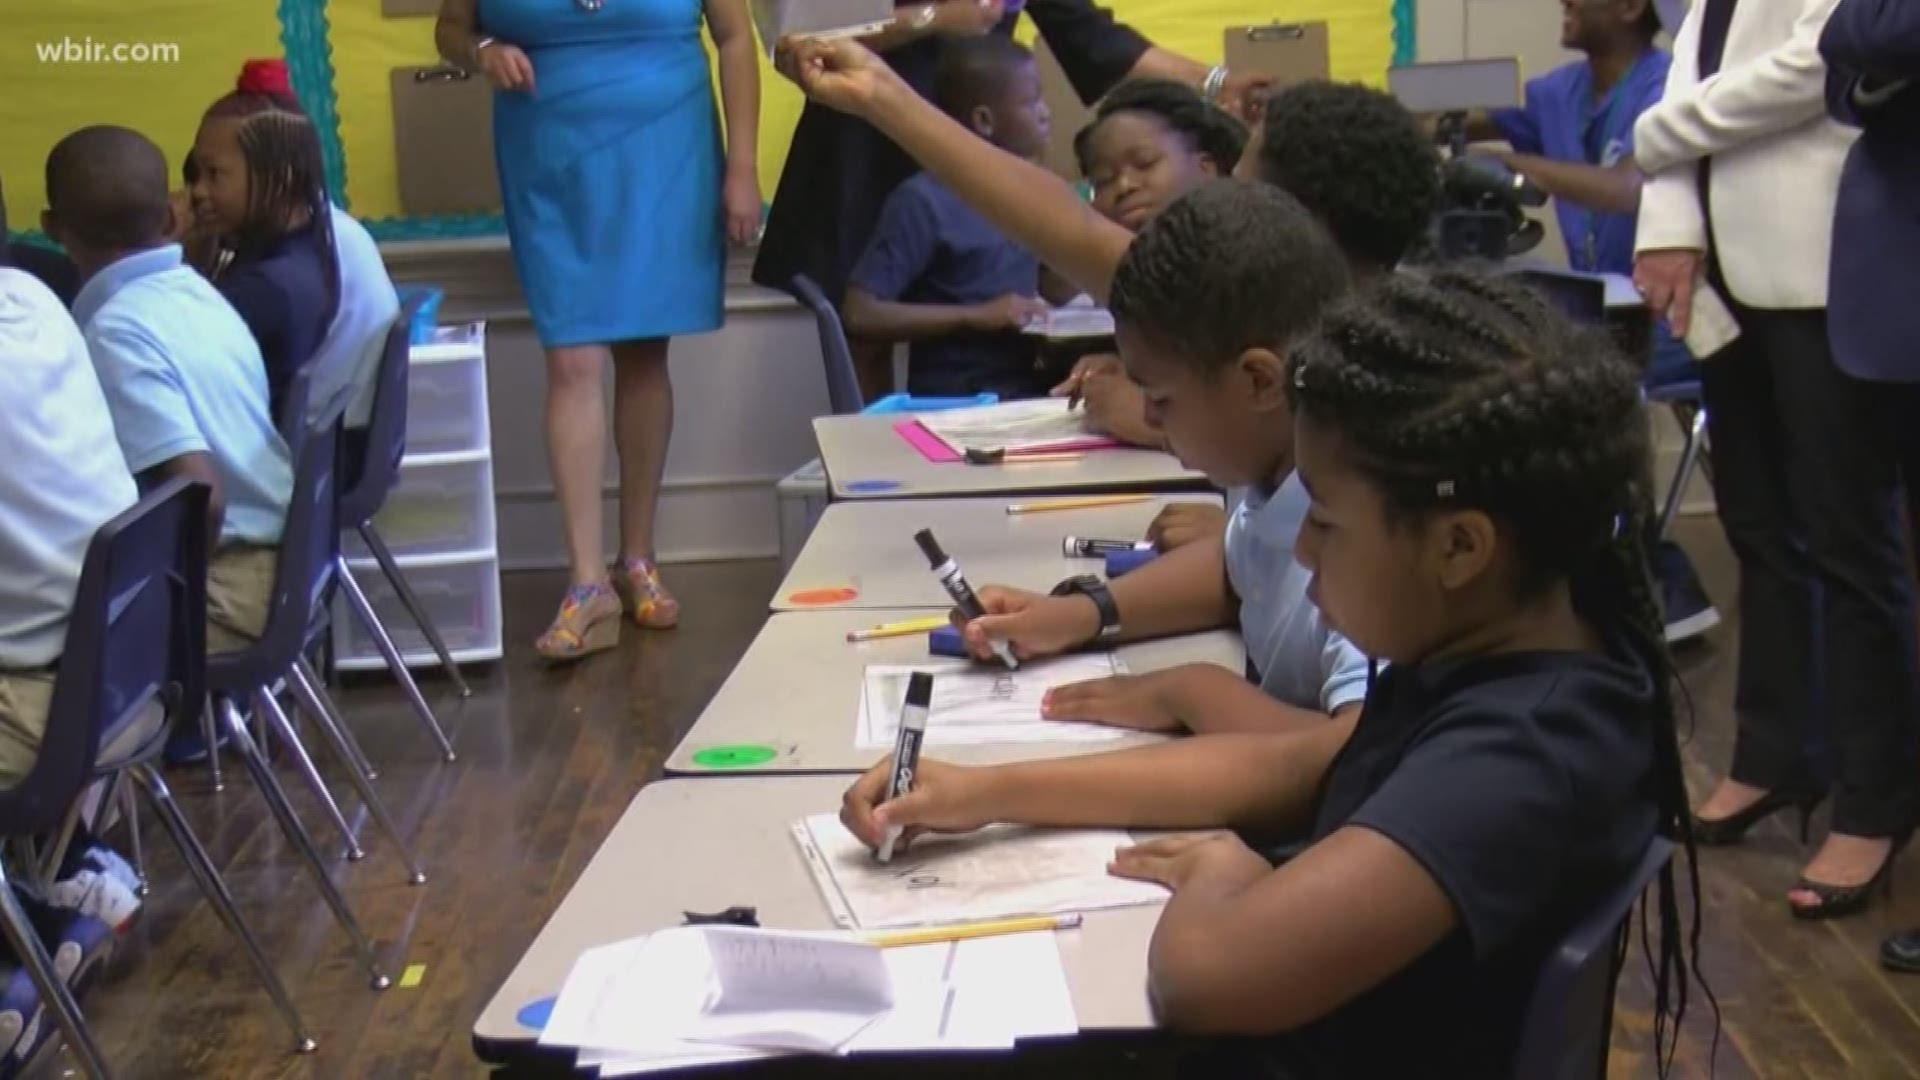 The controversial testing will roll out across the state next week.